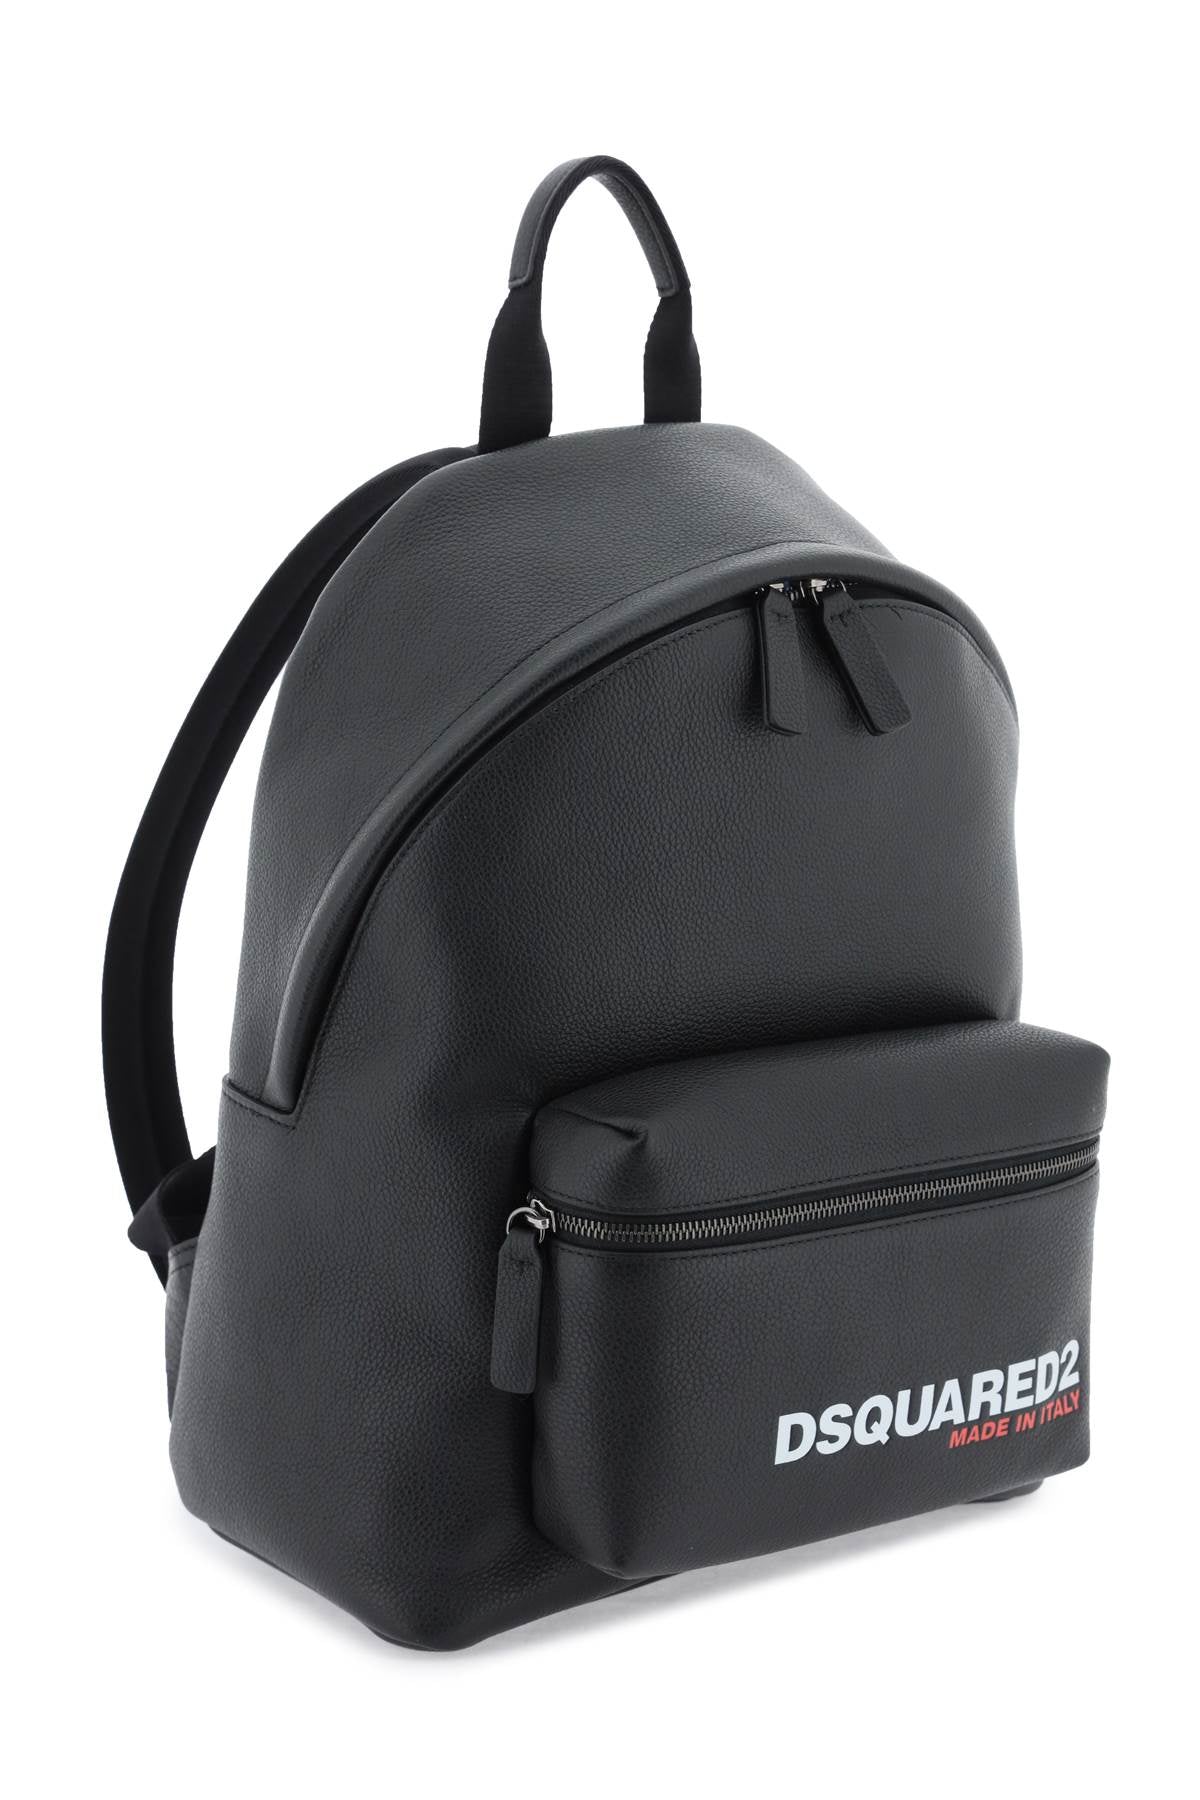 DSQUARED2 Grained Leather Men's Backpack with Contrasting Logo Print